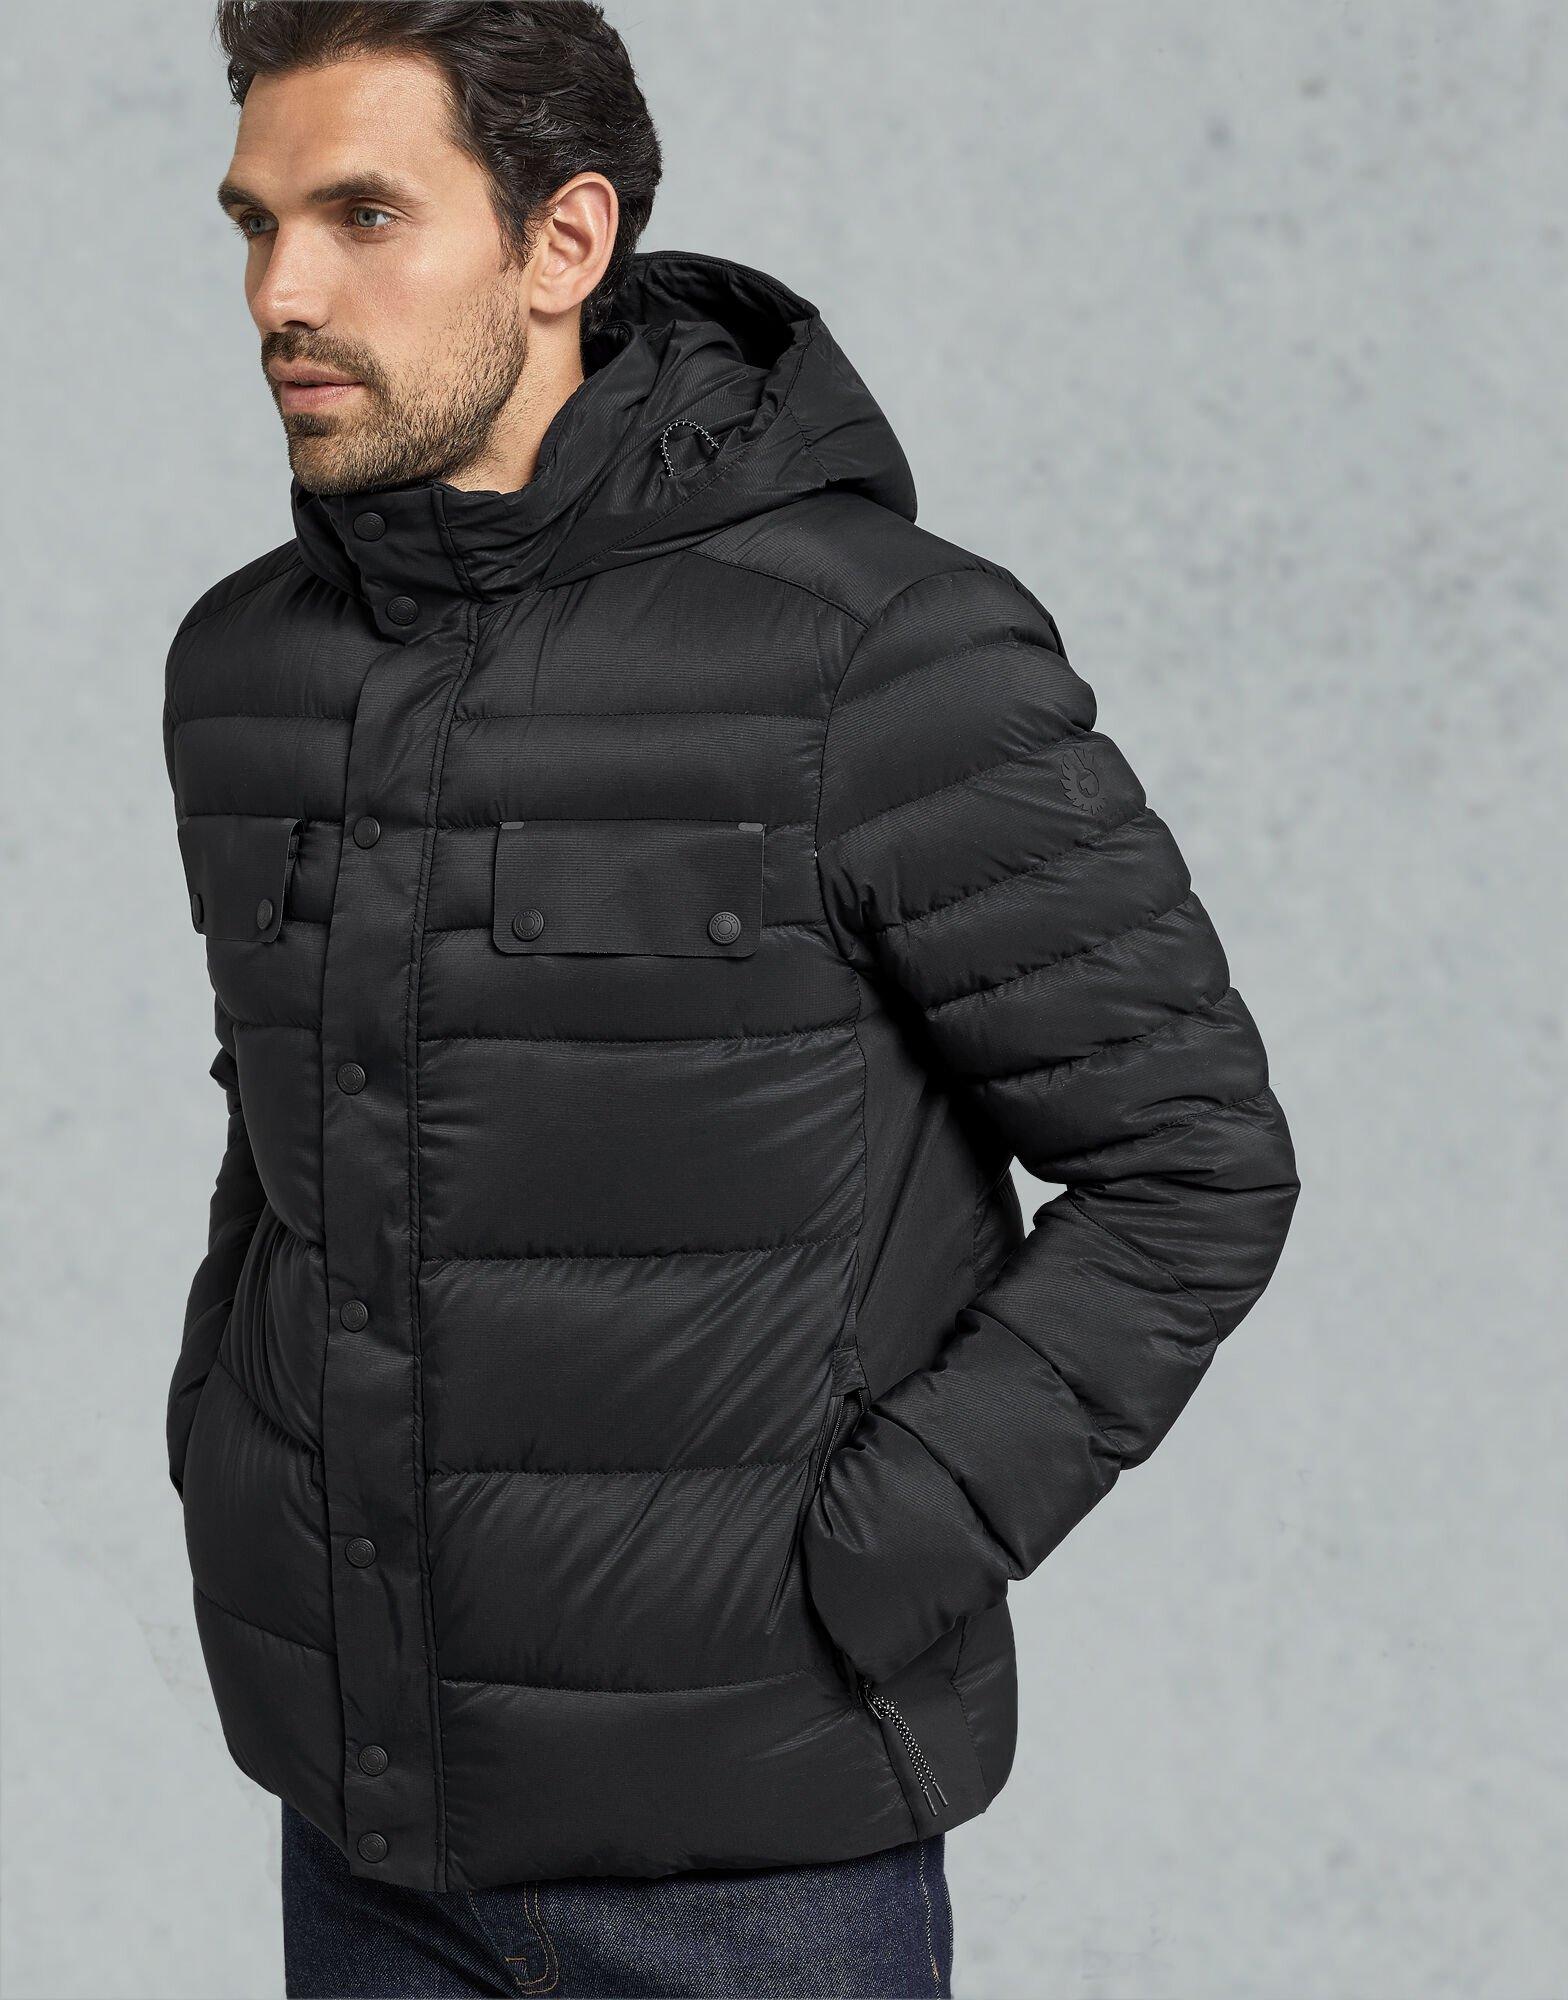 Belstaff Synthetic Atlas Quilted Jacket in Black for Men - Lyst